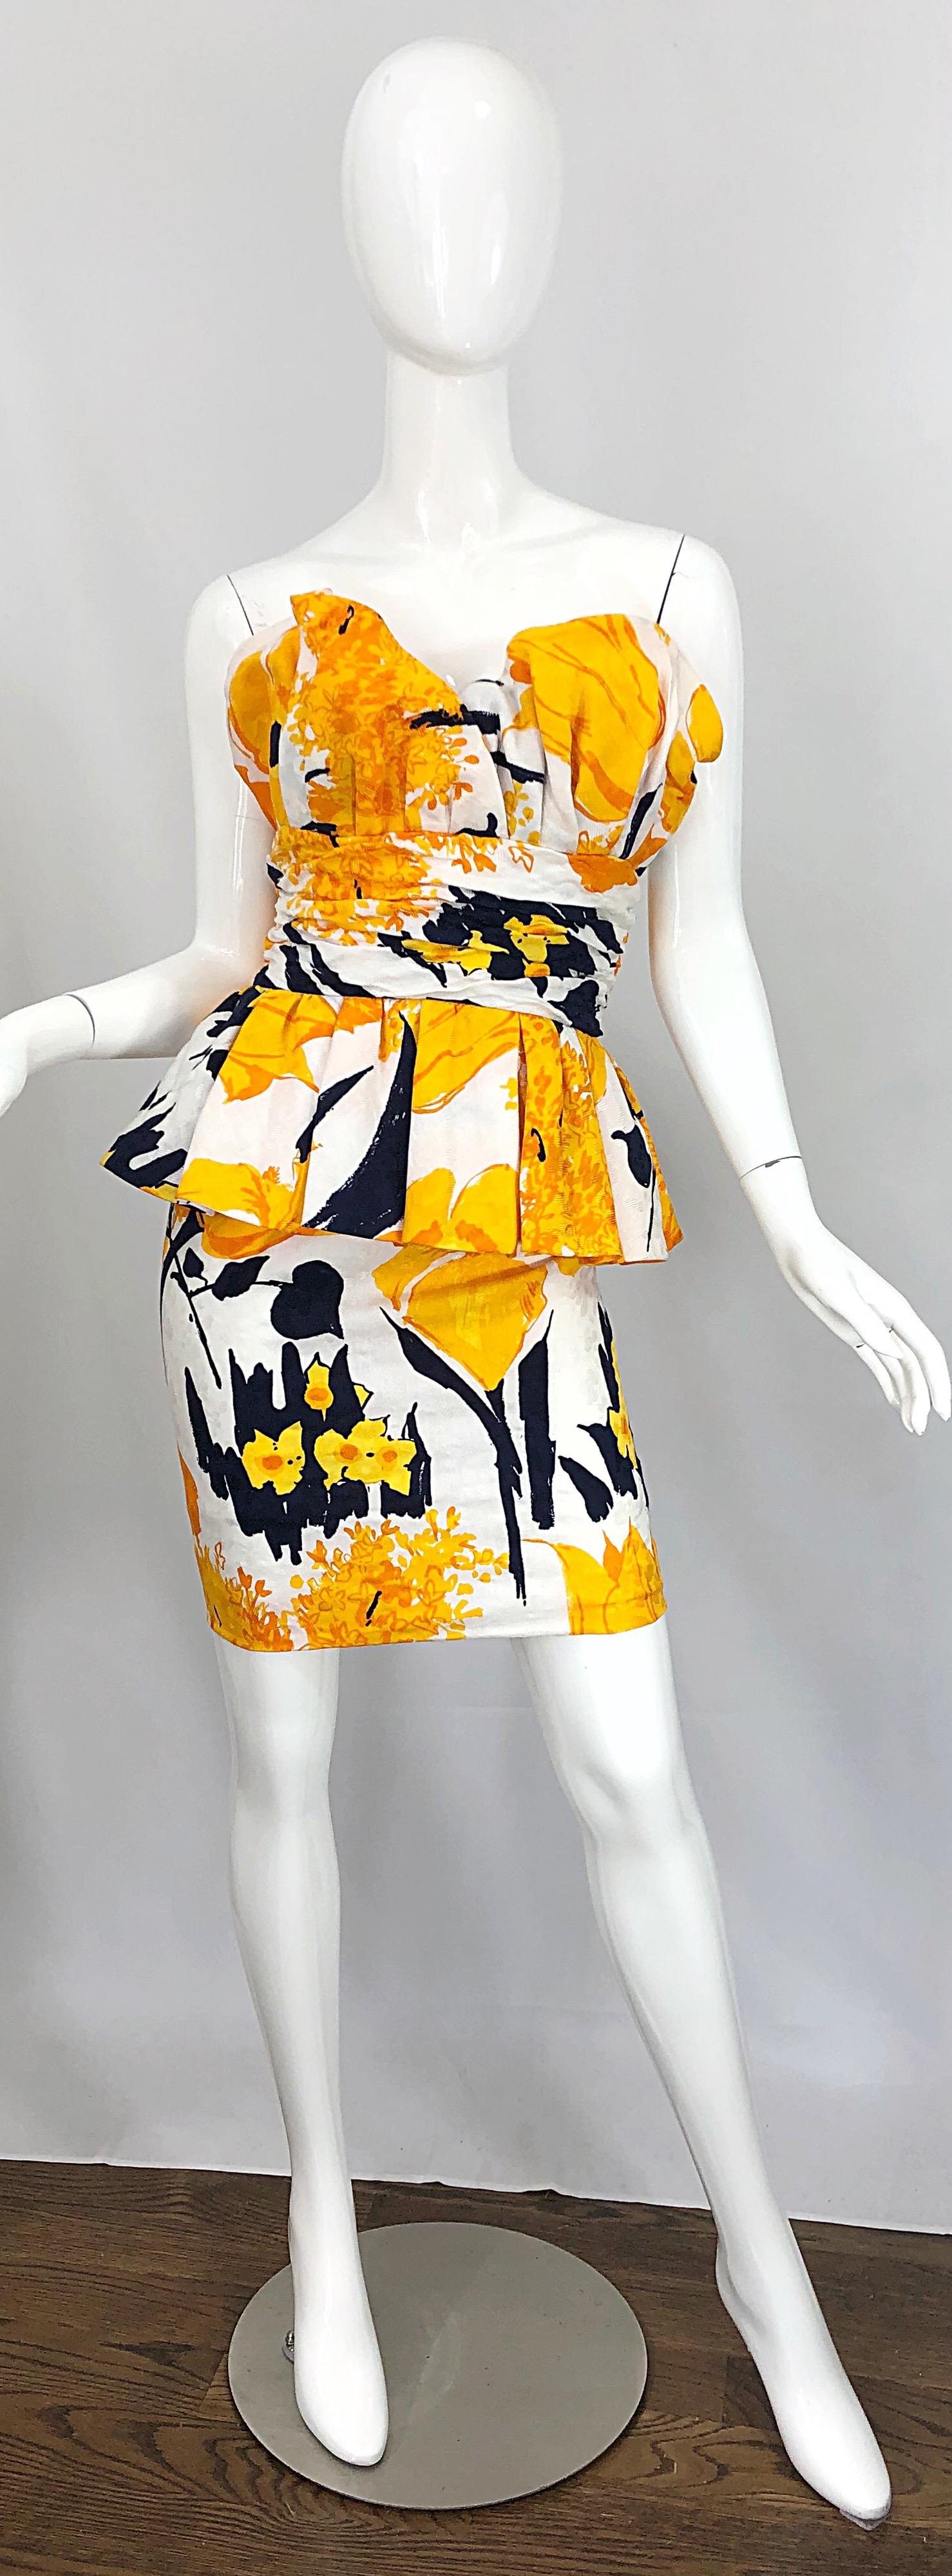 Avant Garde 1980s ARMEN WARDY yellow, black, marigold and white strapless silk mini dress! Features abstract flower prints throughout. Heavy attention to detail with built in support to hold everything in place. Flattering peplum at hips. Hidden